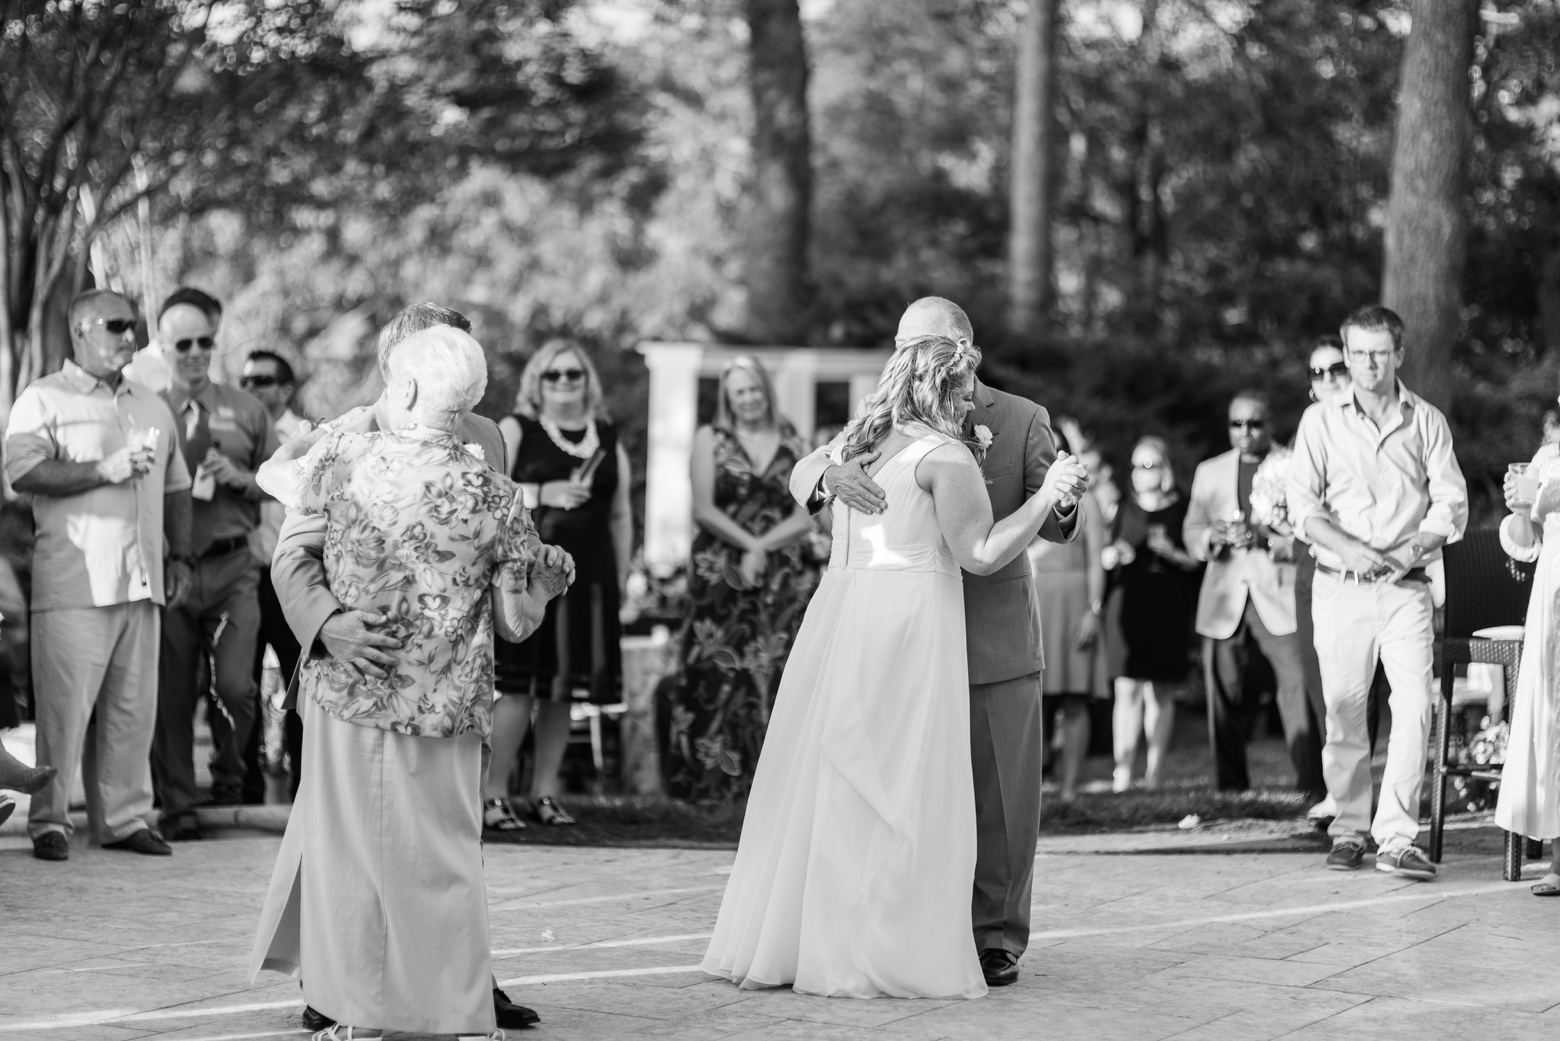 Virginia Beach Wedding Photography by Angie McPherson Photography